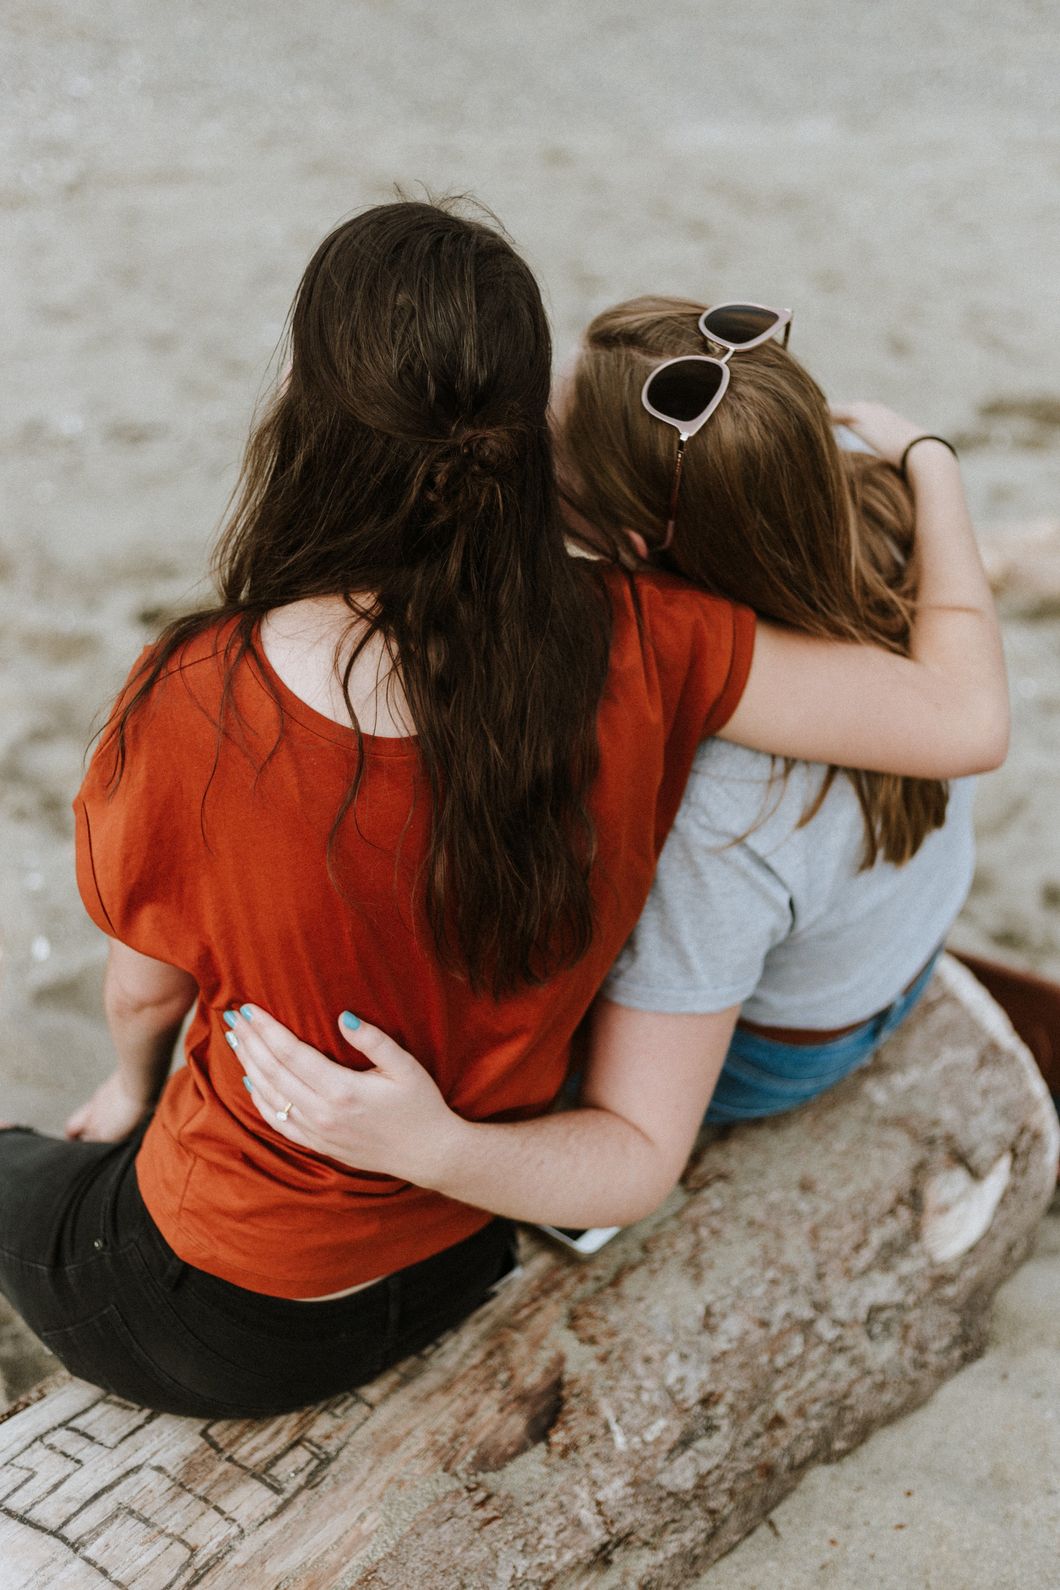 Stop Assuming Your Queer Friends Are Going To End Up Falling For You